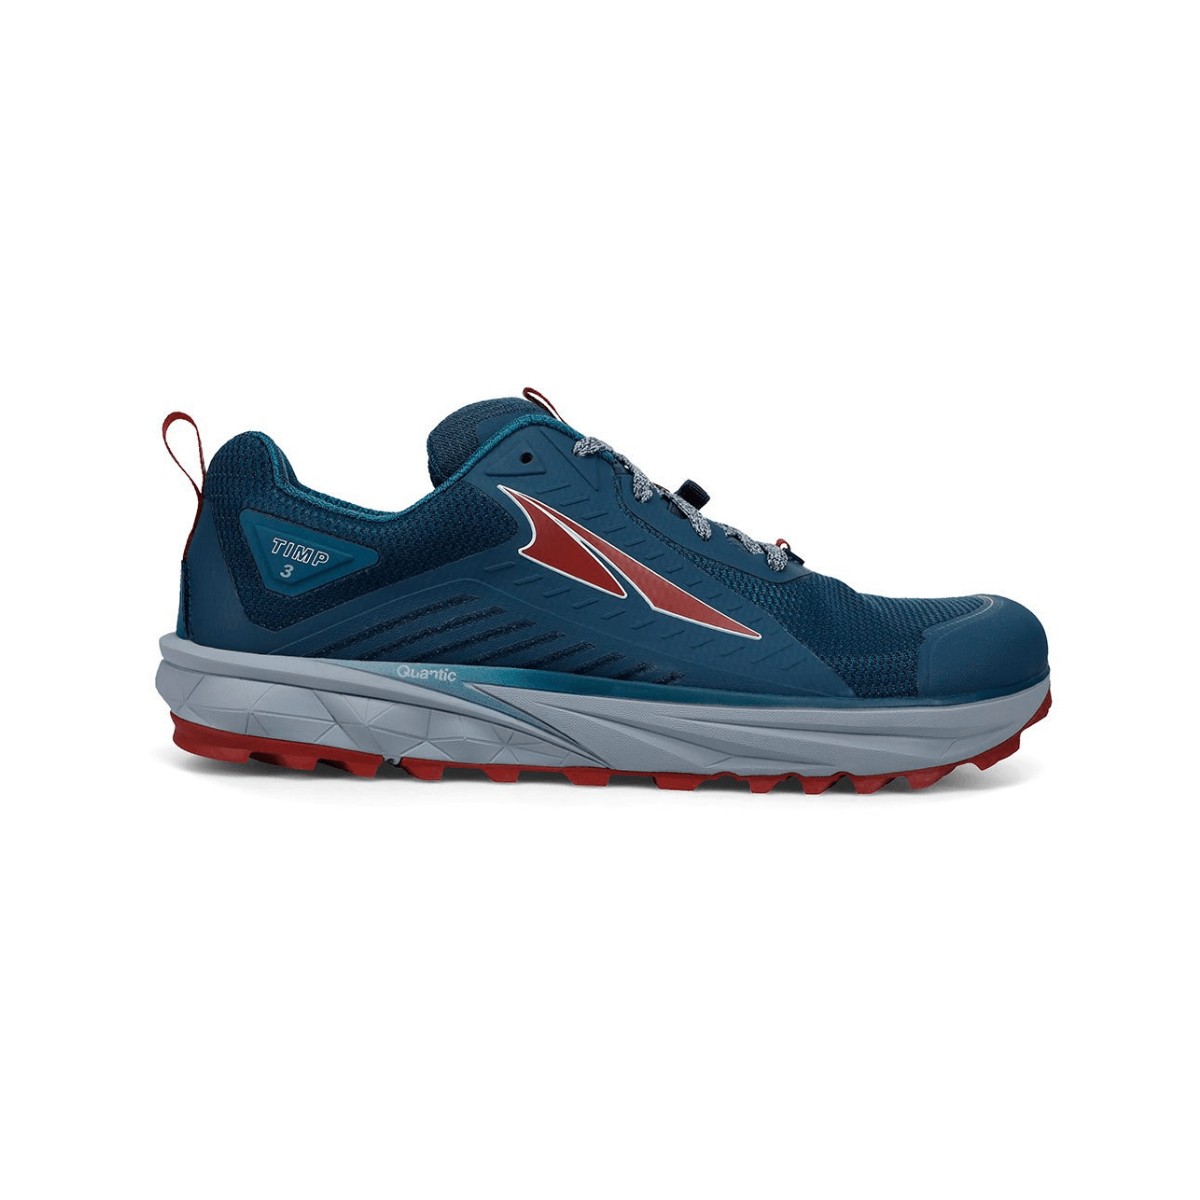 Chaussures Altra Timp 3 Bleu AW21, Taille 47 - EUR